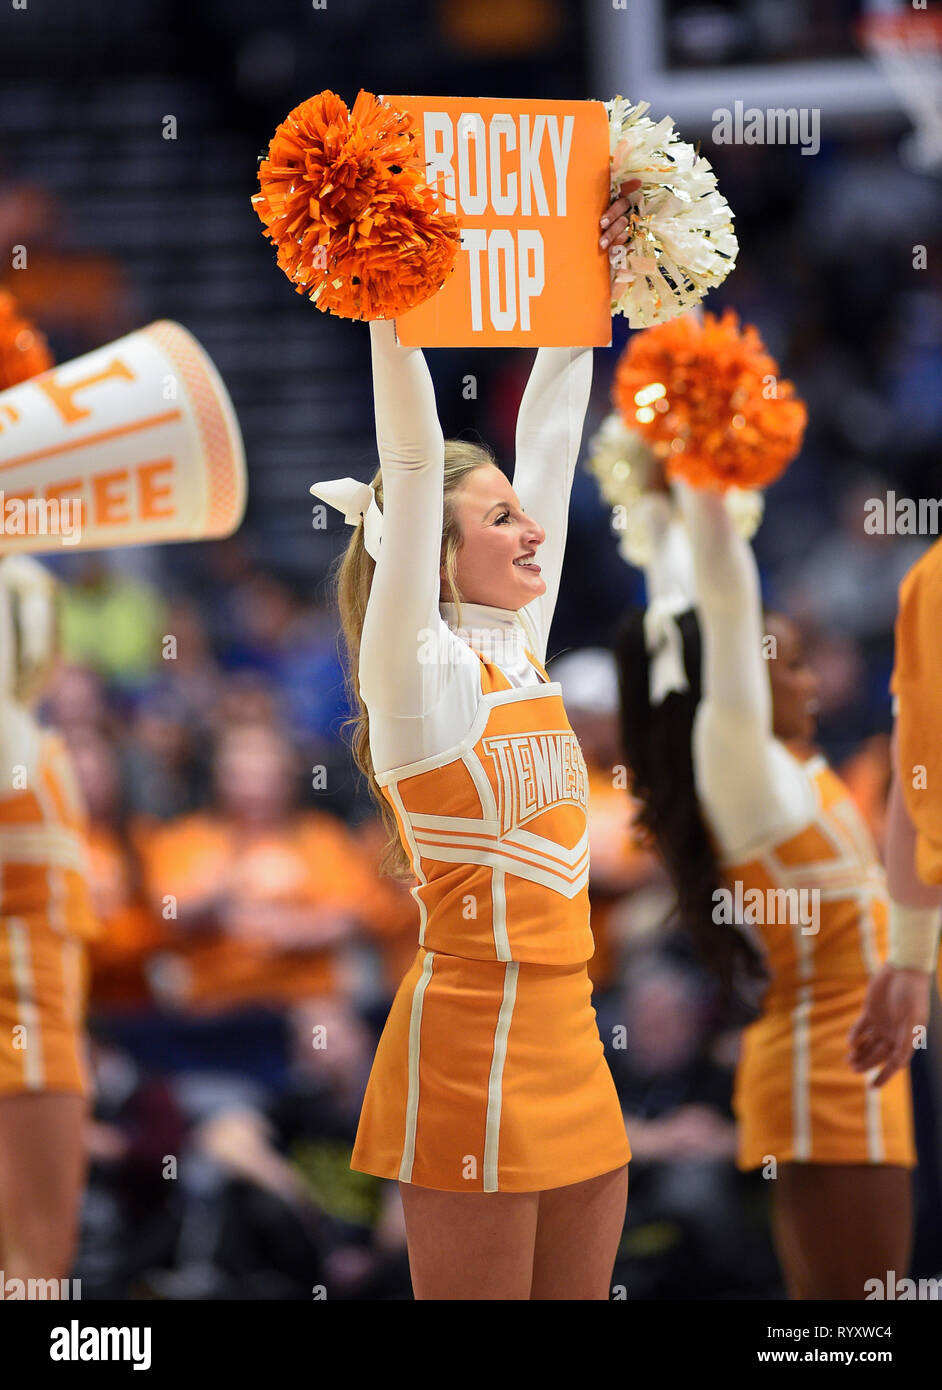 Tennessee Volunteers cheerleaders holds up a Rocky Top sign March 15, 2019; during a SEC championship series game between the Mississippi State Bulldogs vs Tennessee Volunteers at Bridgestone Arena in Nashville, TN (Mandatory Photo Credit: Steve Roberts/Cal Sport Media) Stock Photo